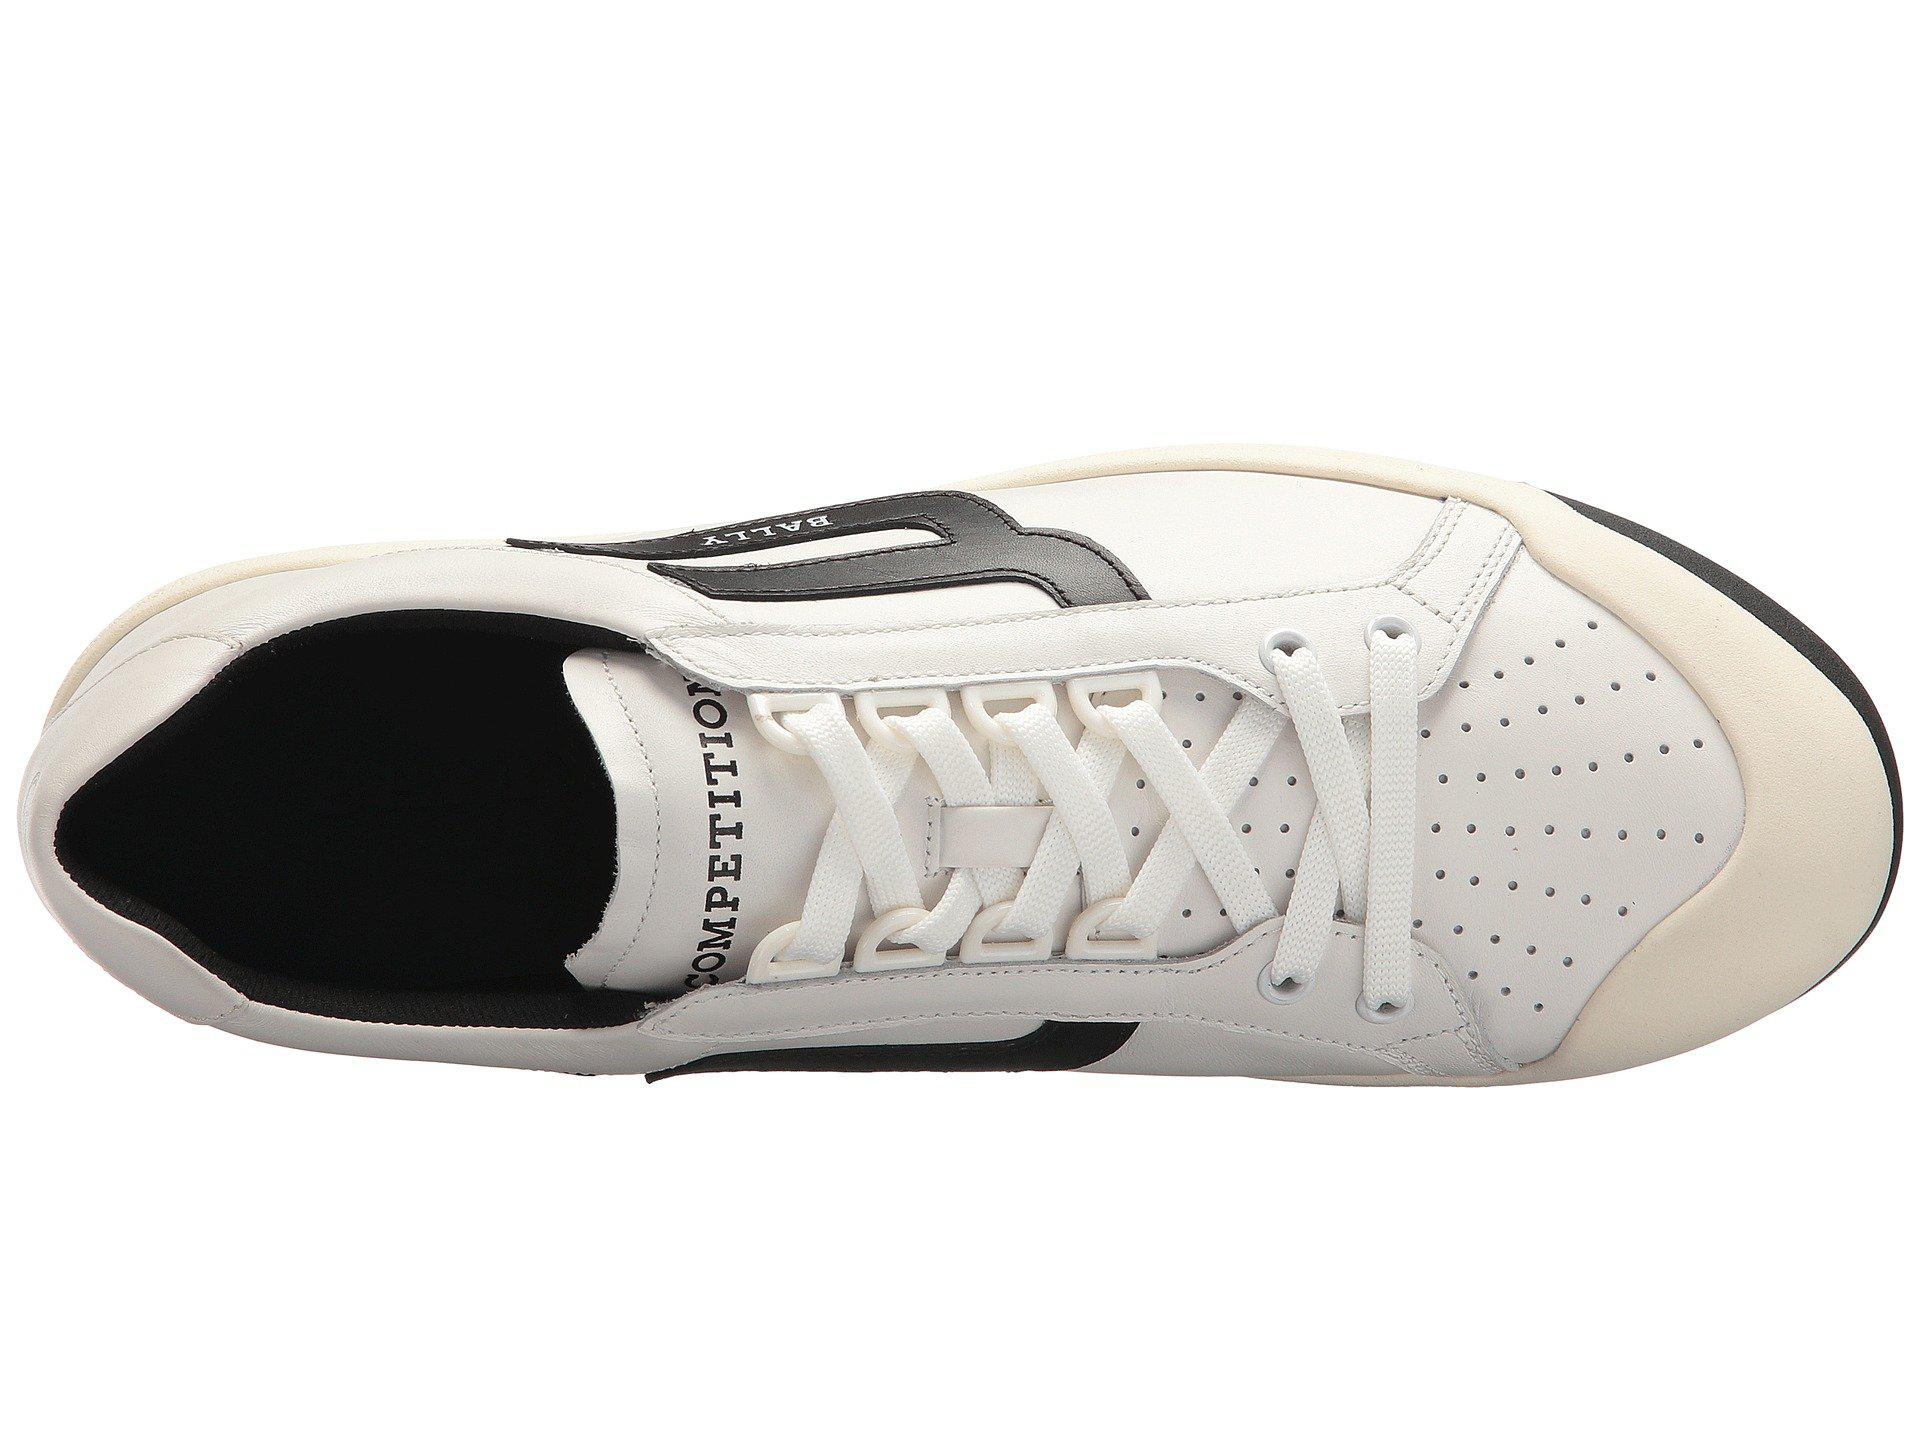 Bally Leather New Competition Retro Sneaker in White for Men - Lyst